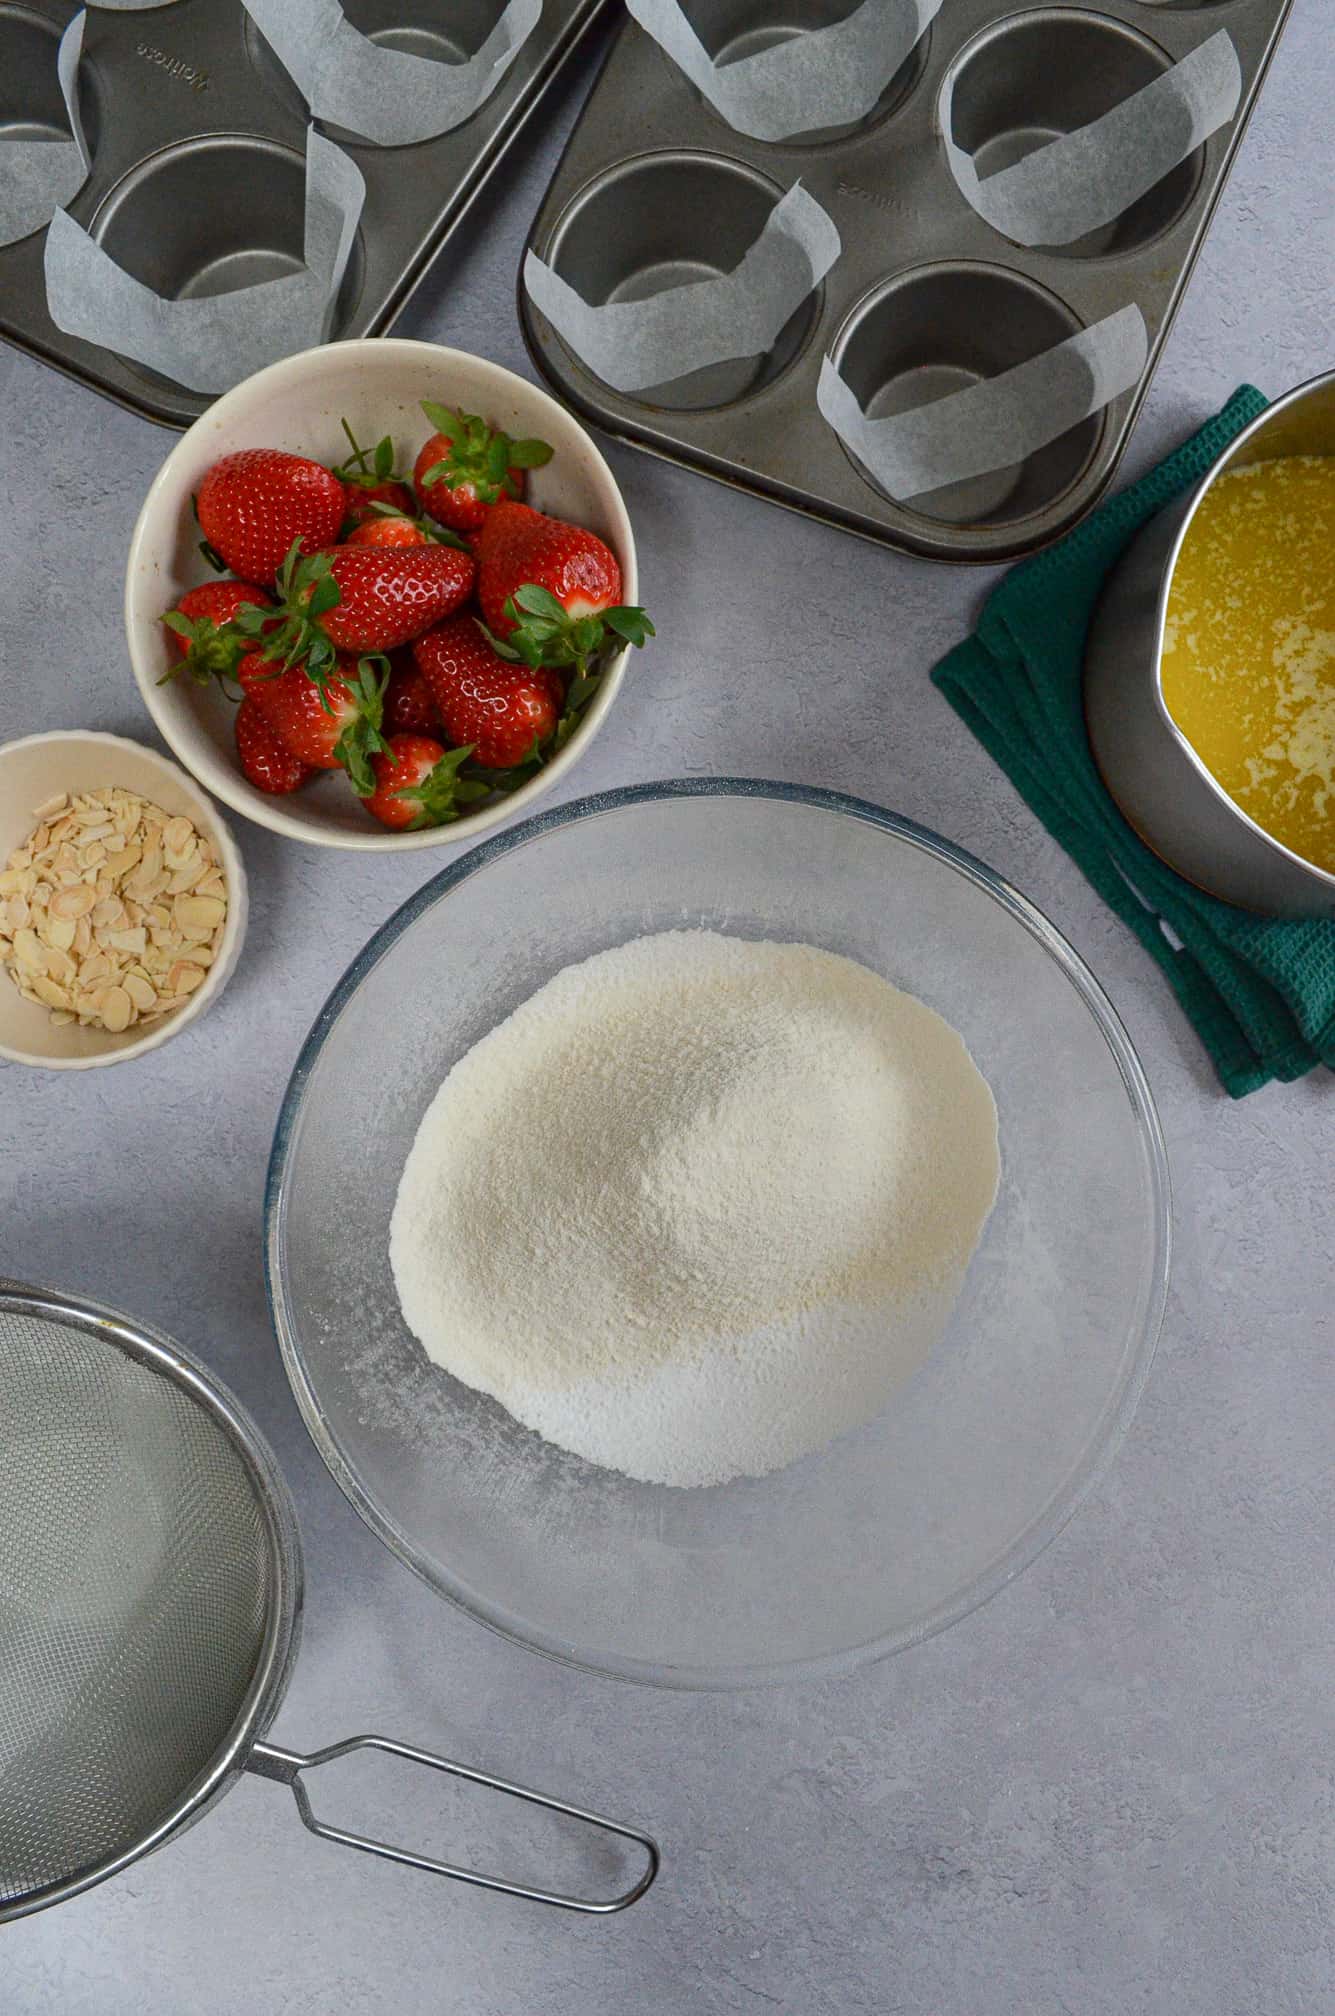 icing sugar and flour together in bowl, with strawberries and flaked almonds to the side